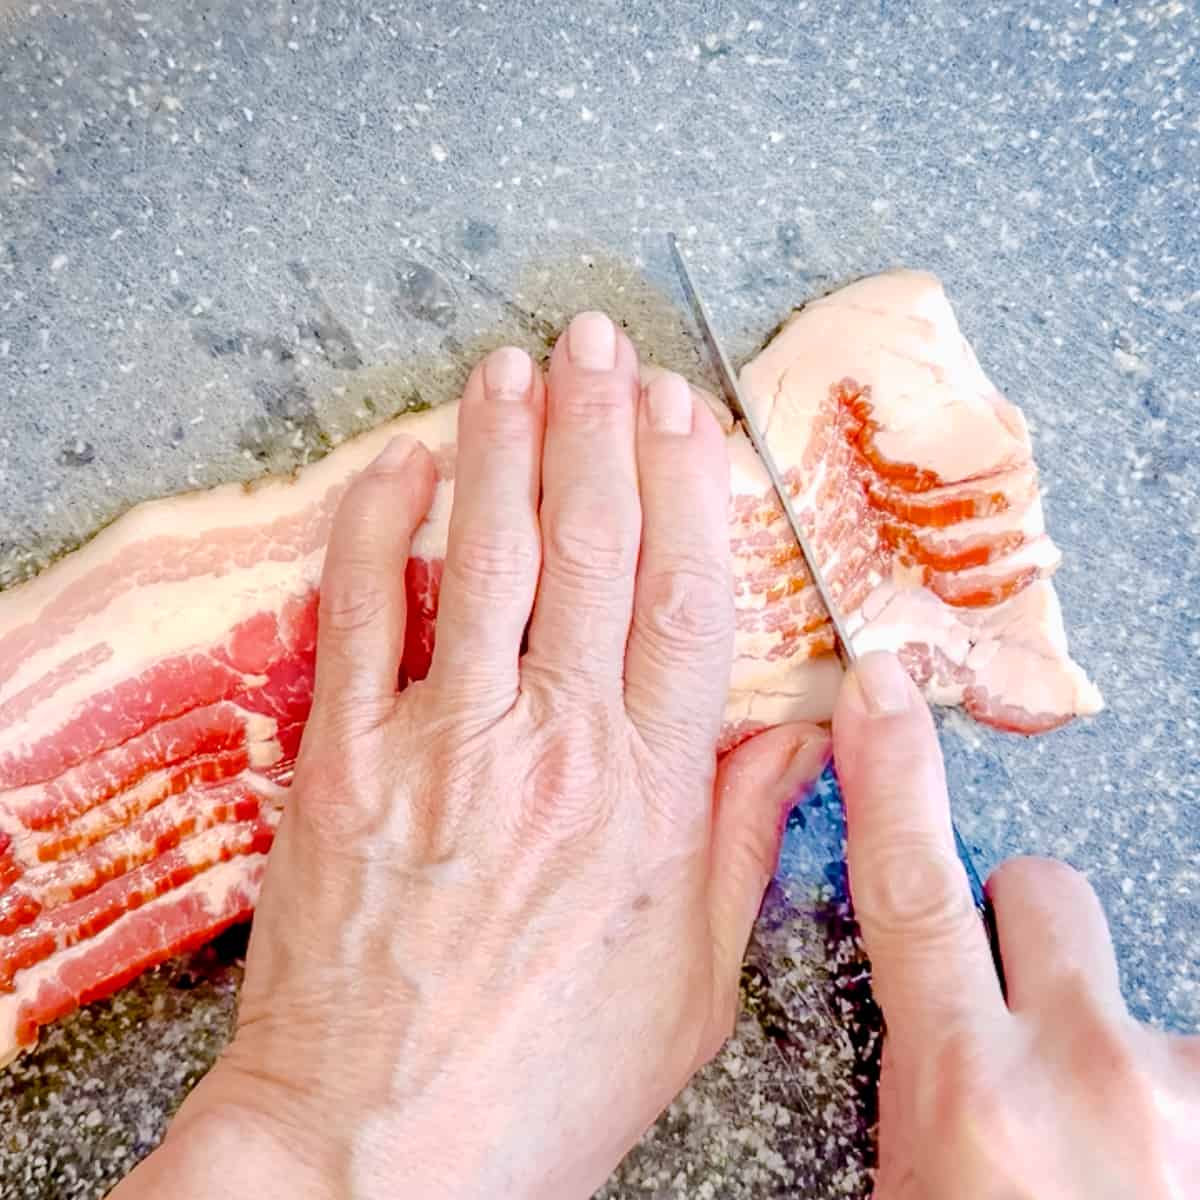 Slicing heavily fatty ends from bacon strips.